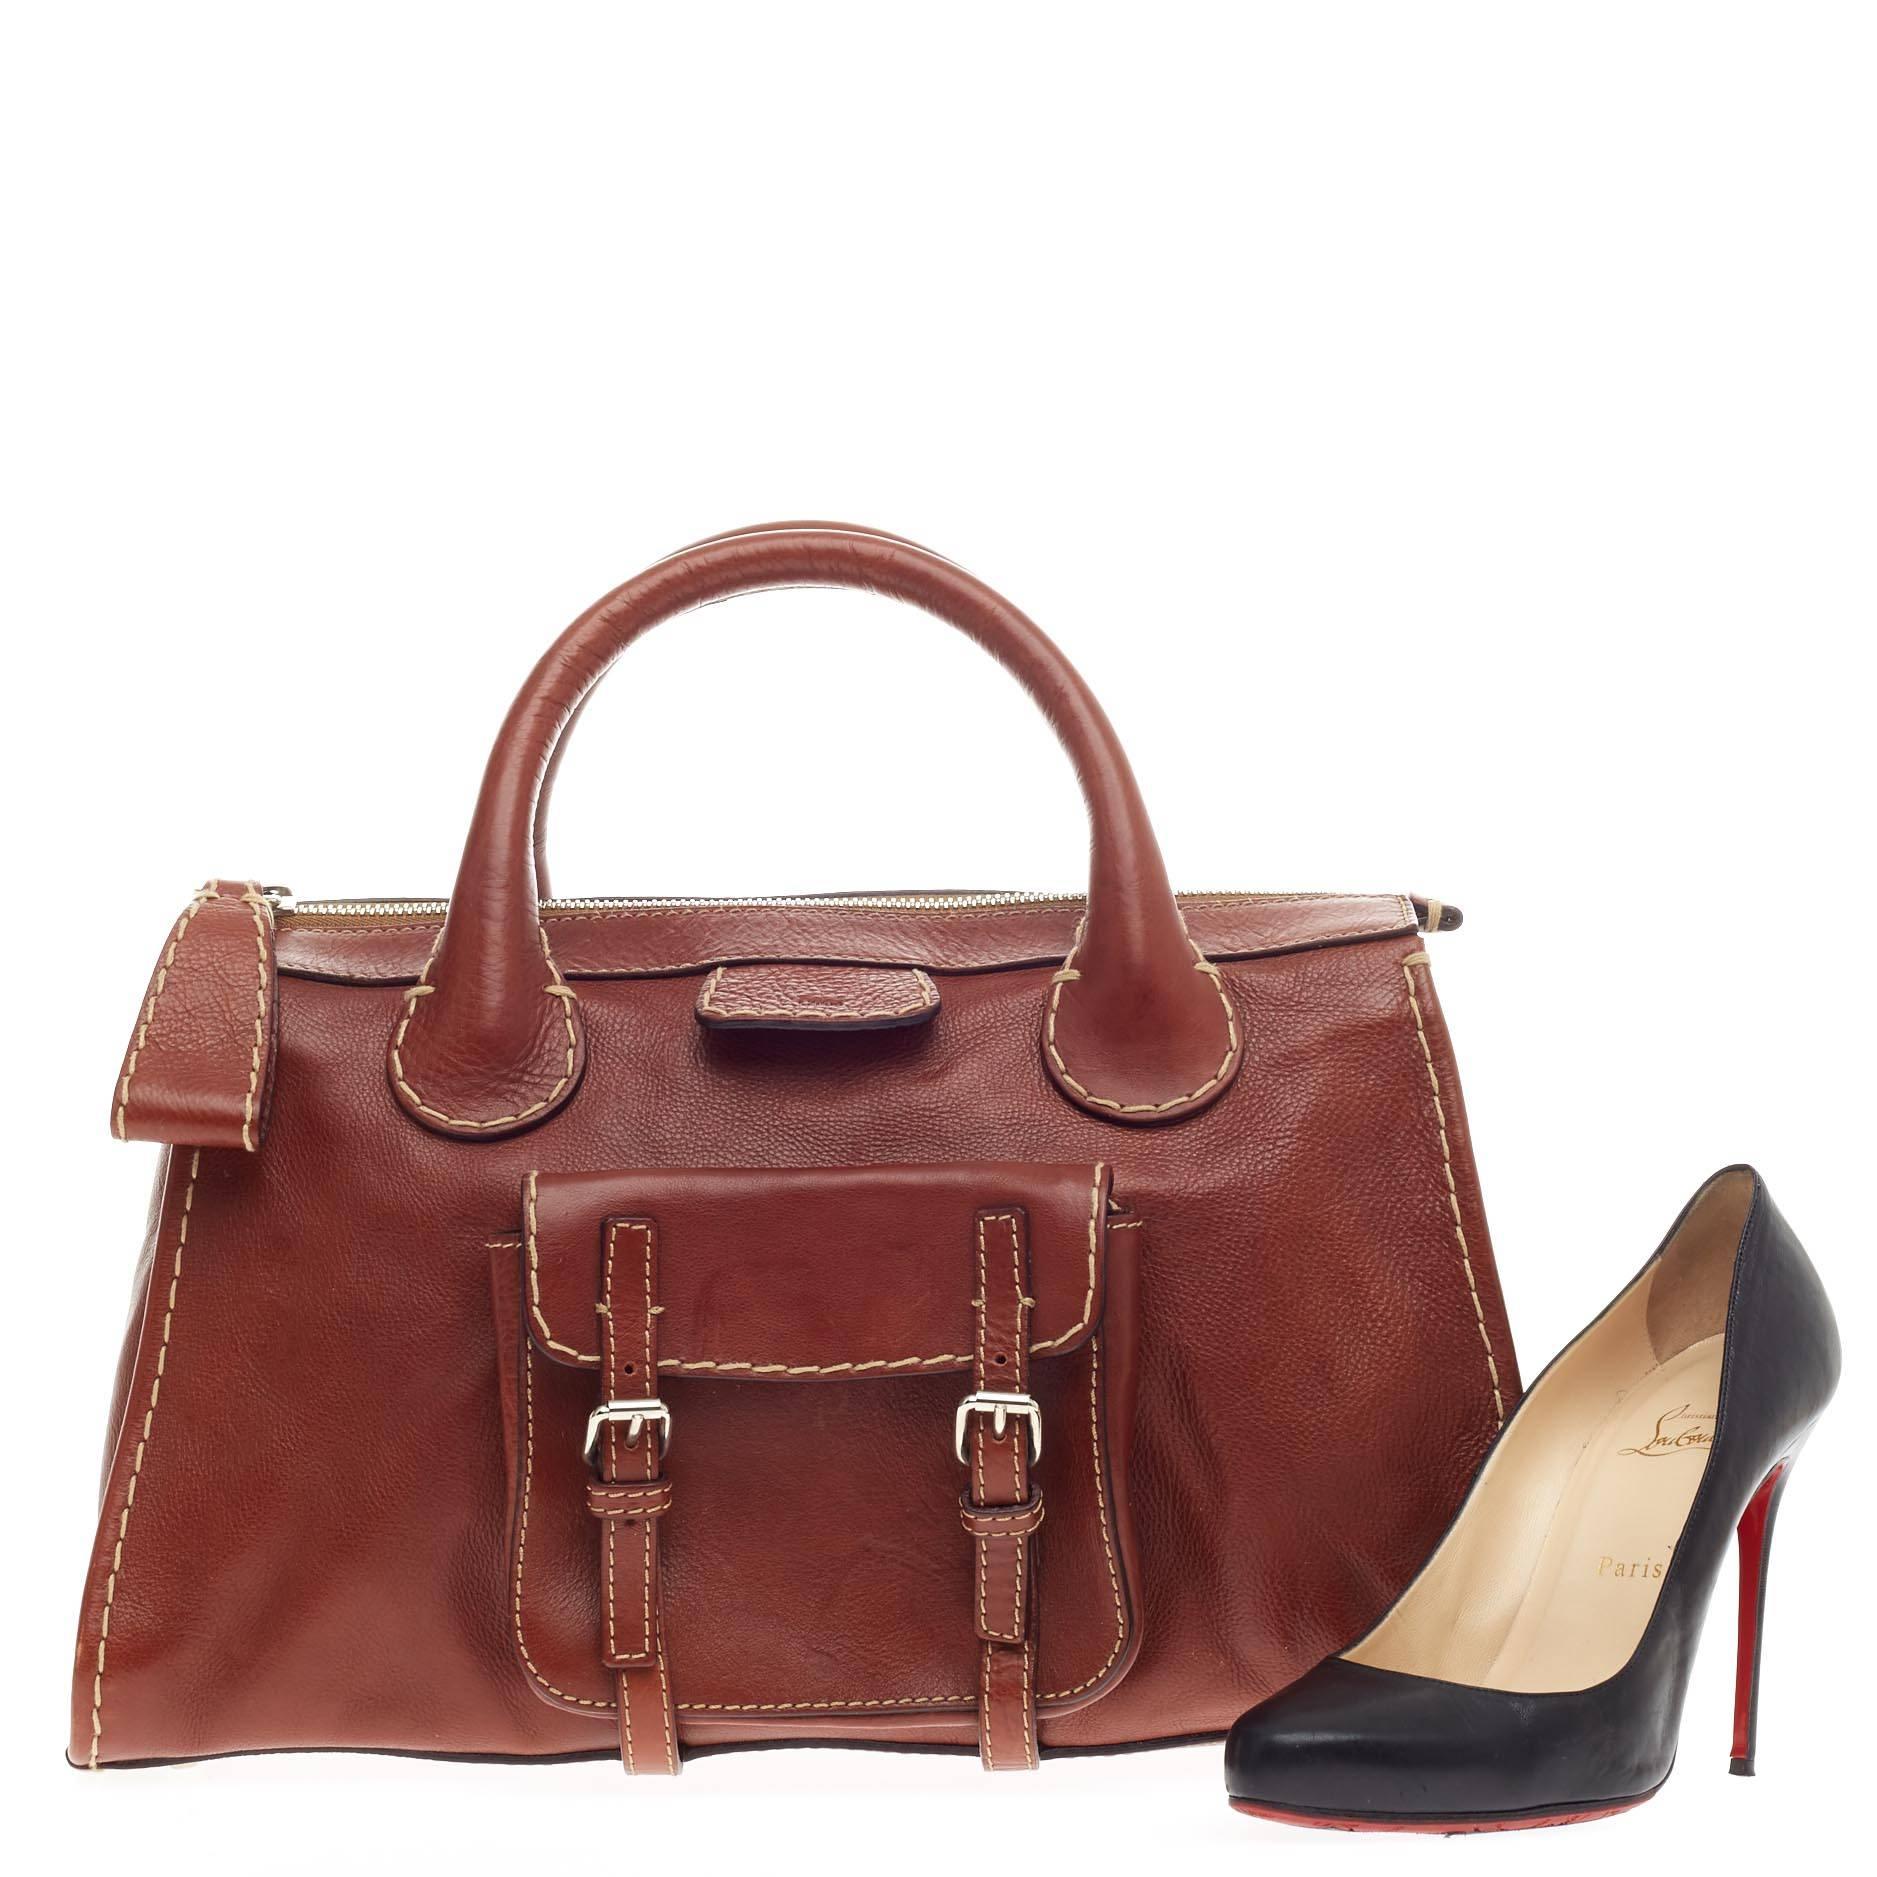 This authentic Chloe Edith Satchel Leather crafted in supple brown leather showcases Chloe's industrially distinct design. This roomy satchel features stylized hand-stitched contrast details, an external front pocket with silver belts and buckles